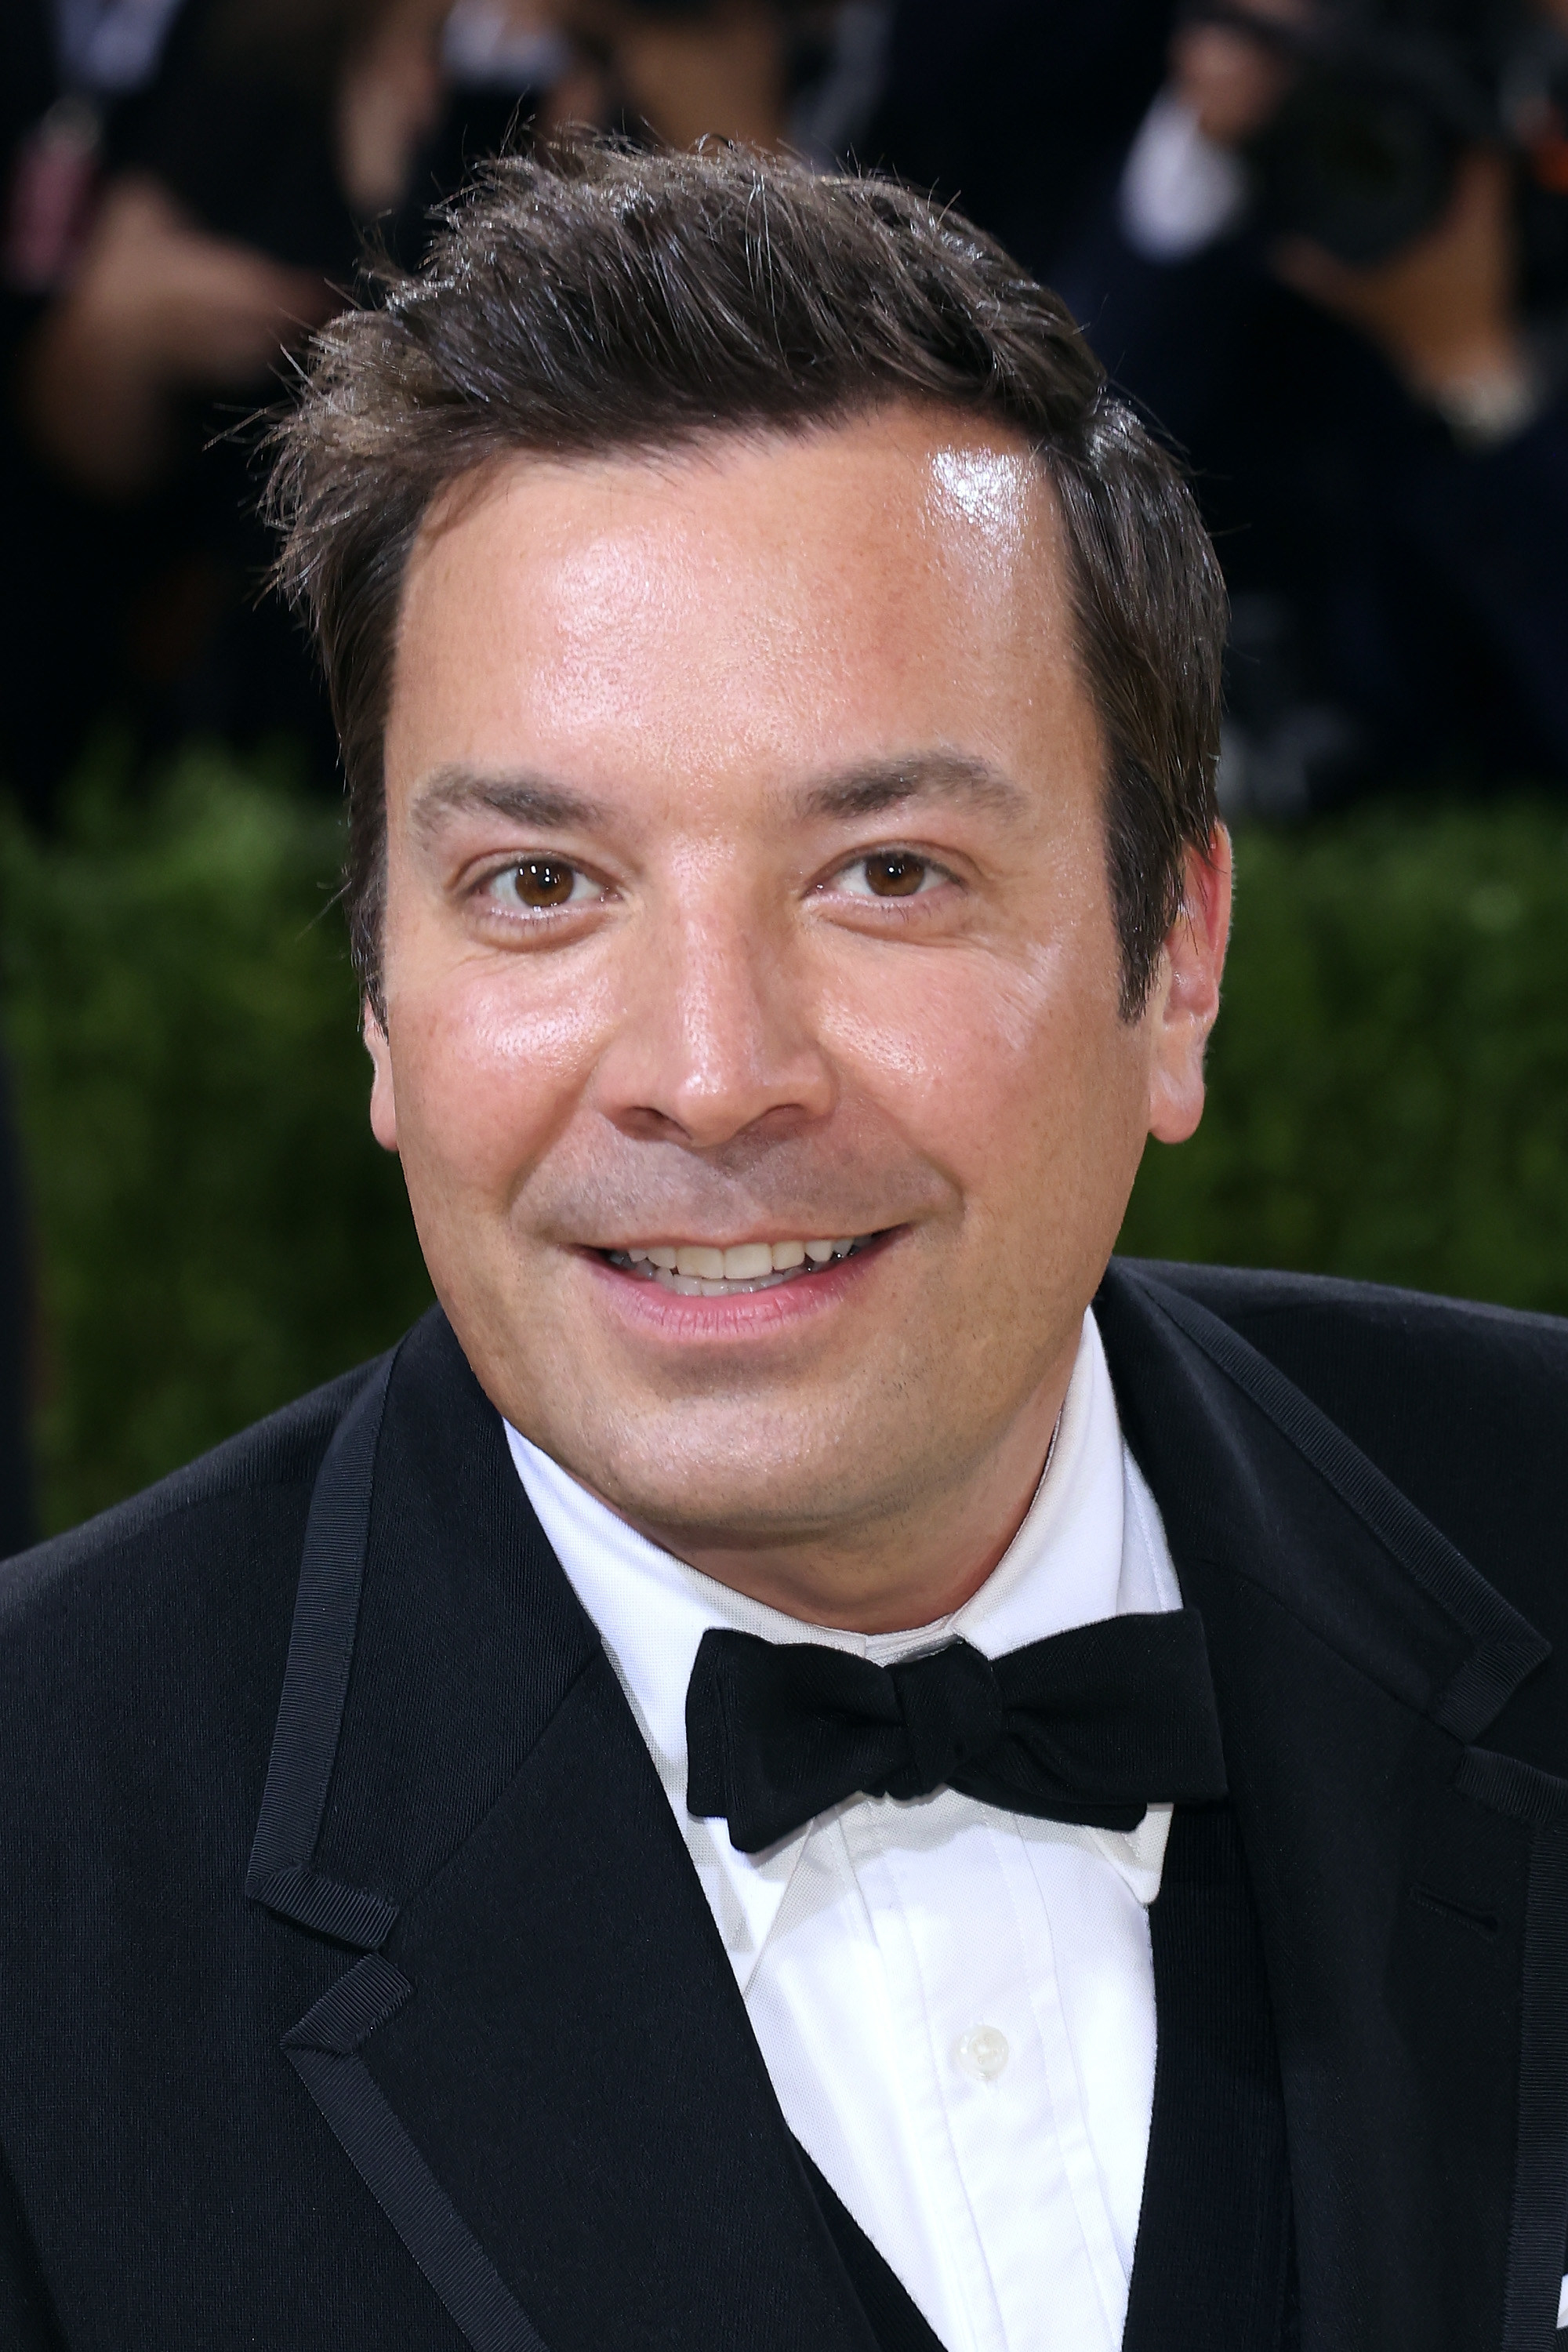 Jimmy Fallon poses at the 2021 Met Gala on September 13, 2021 in New York City